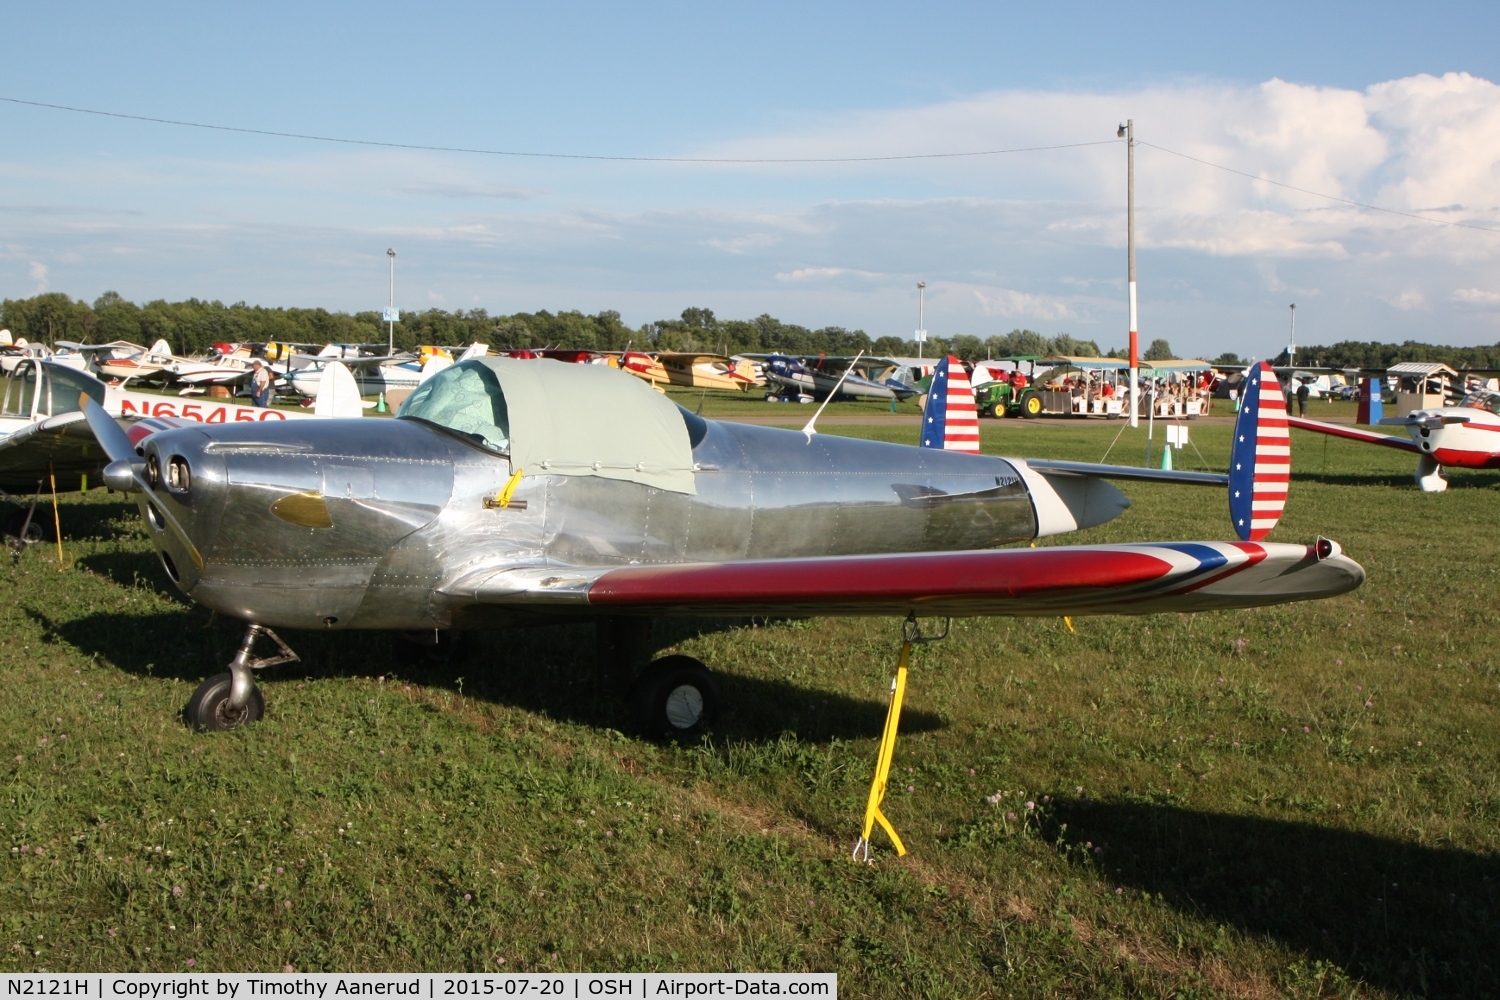 N2121H, 1946 Erco 415C Ercoupe C/N 2744, 1946 Engineering & Research ERCOUPE 415-C, c/n: 2744